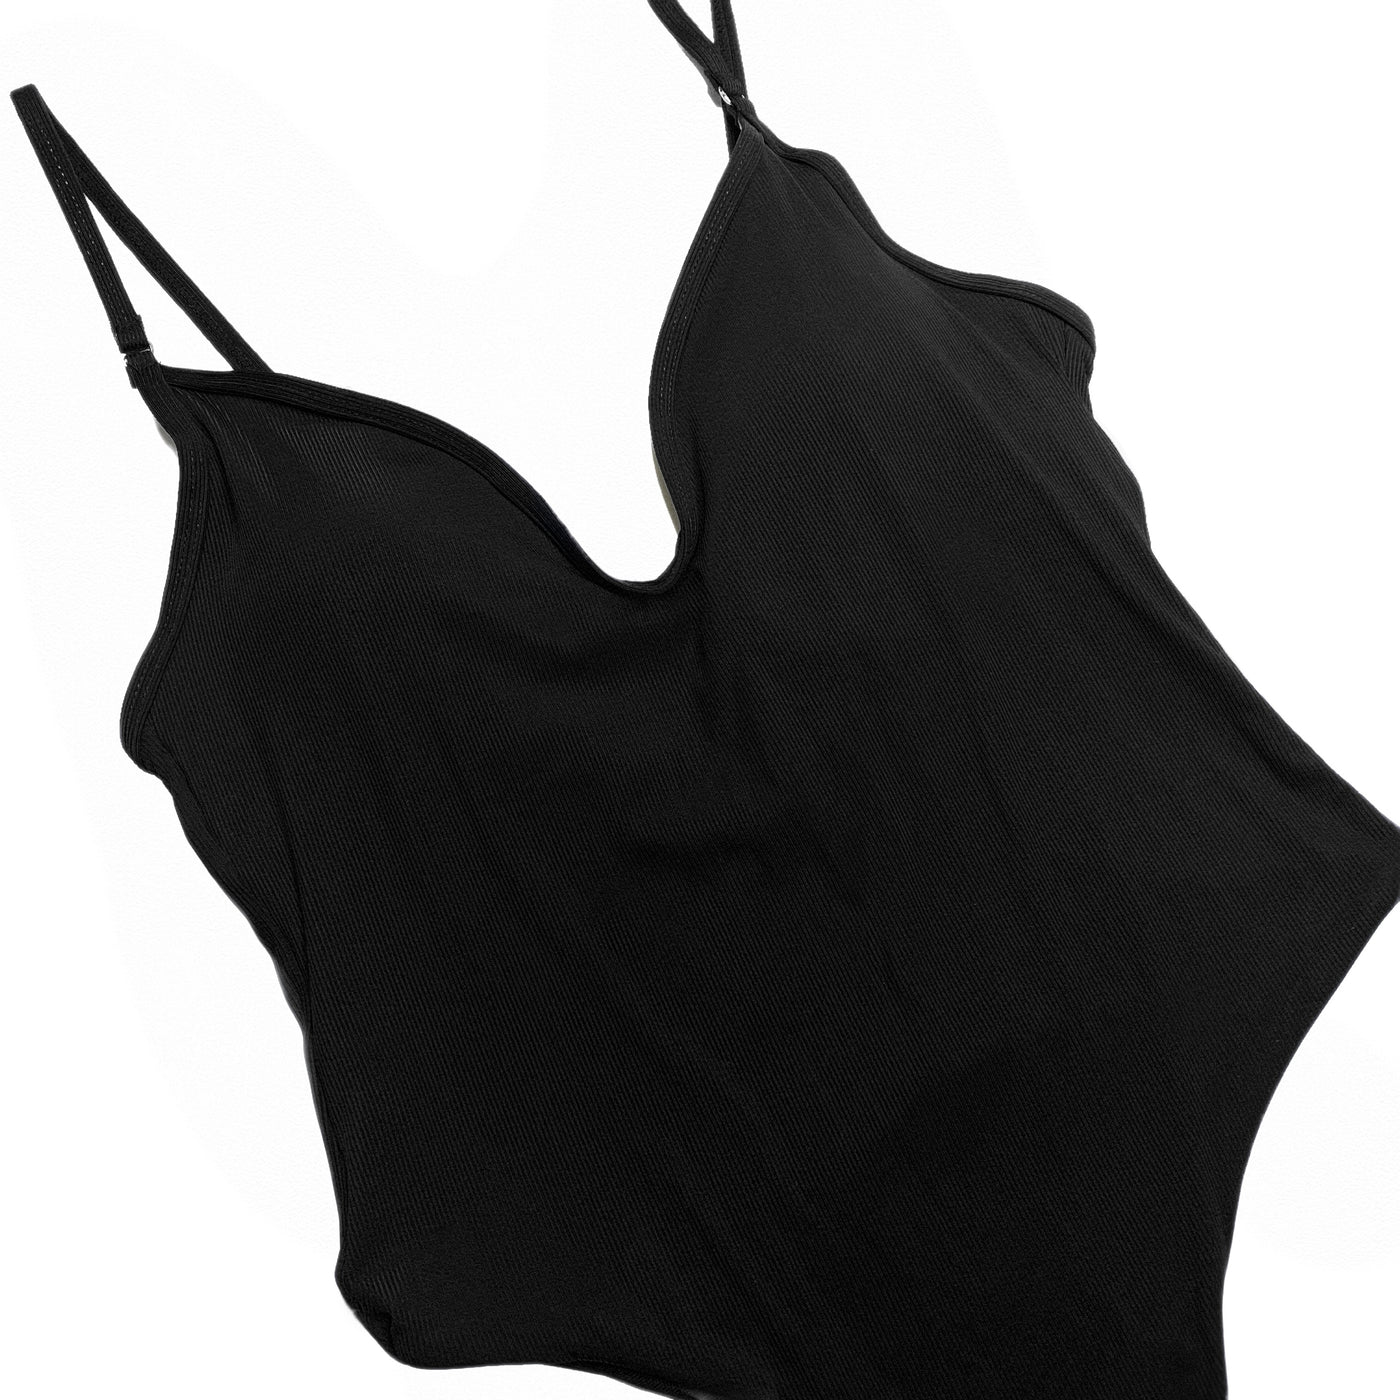 THE BASIC ONE PIECE SWIMSUIT